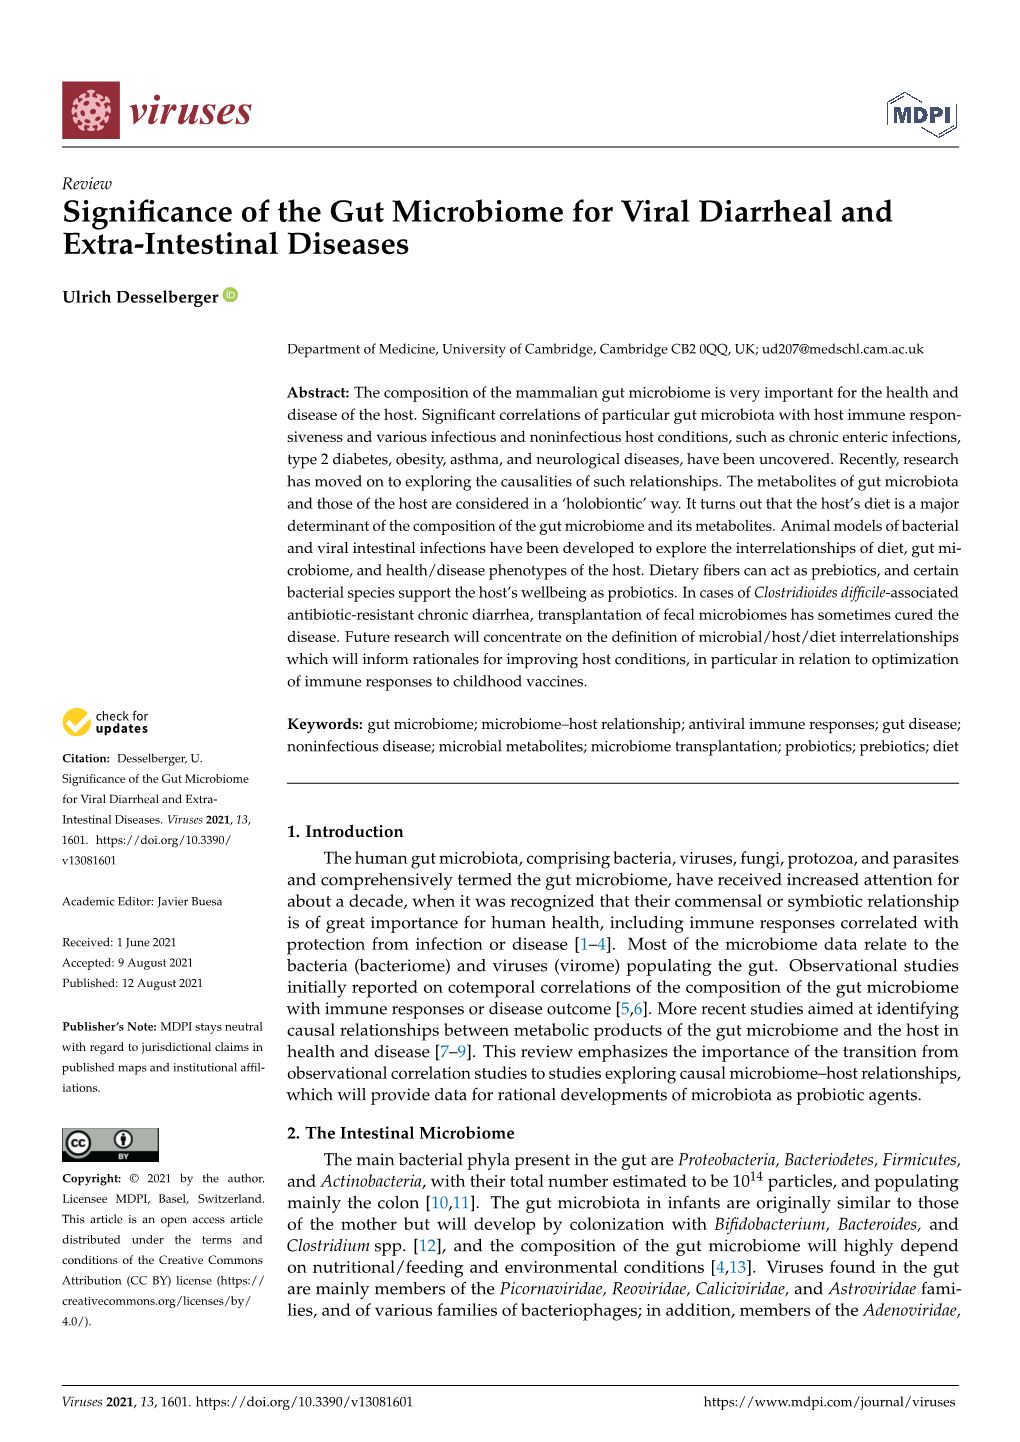 Significance of the Gut Microbiome for Viral Diarrheal and Extra-Intestinal